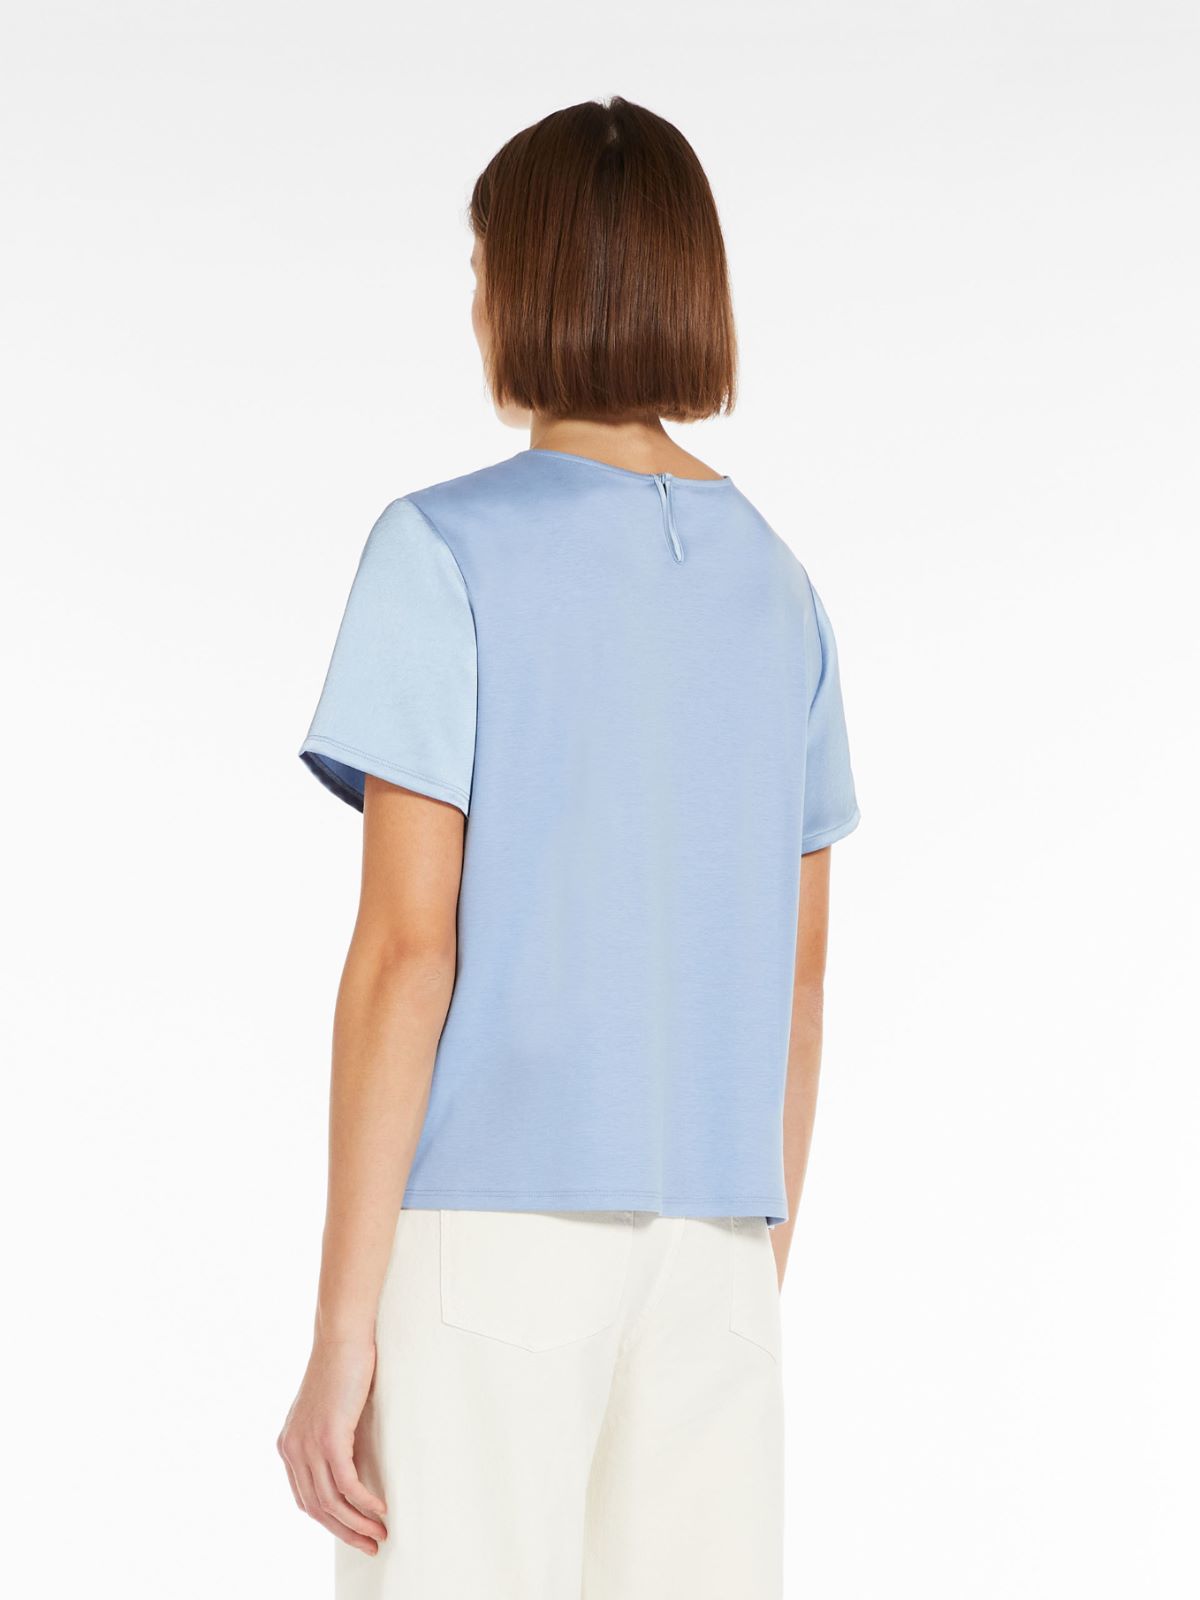 Blouse in satin and jersey - LIGHT BLUE - Weekend Max Mara - 3